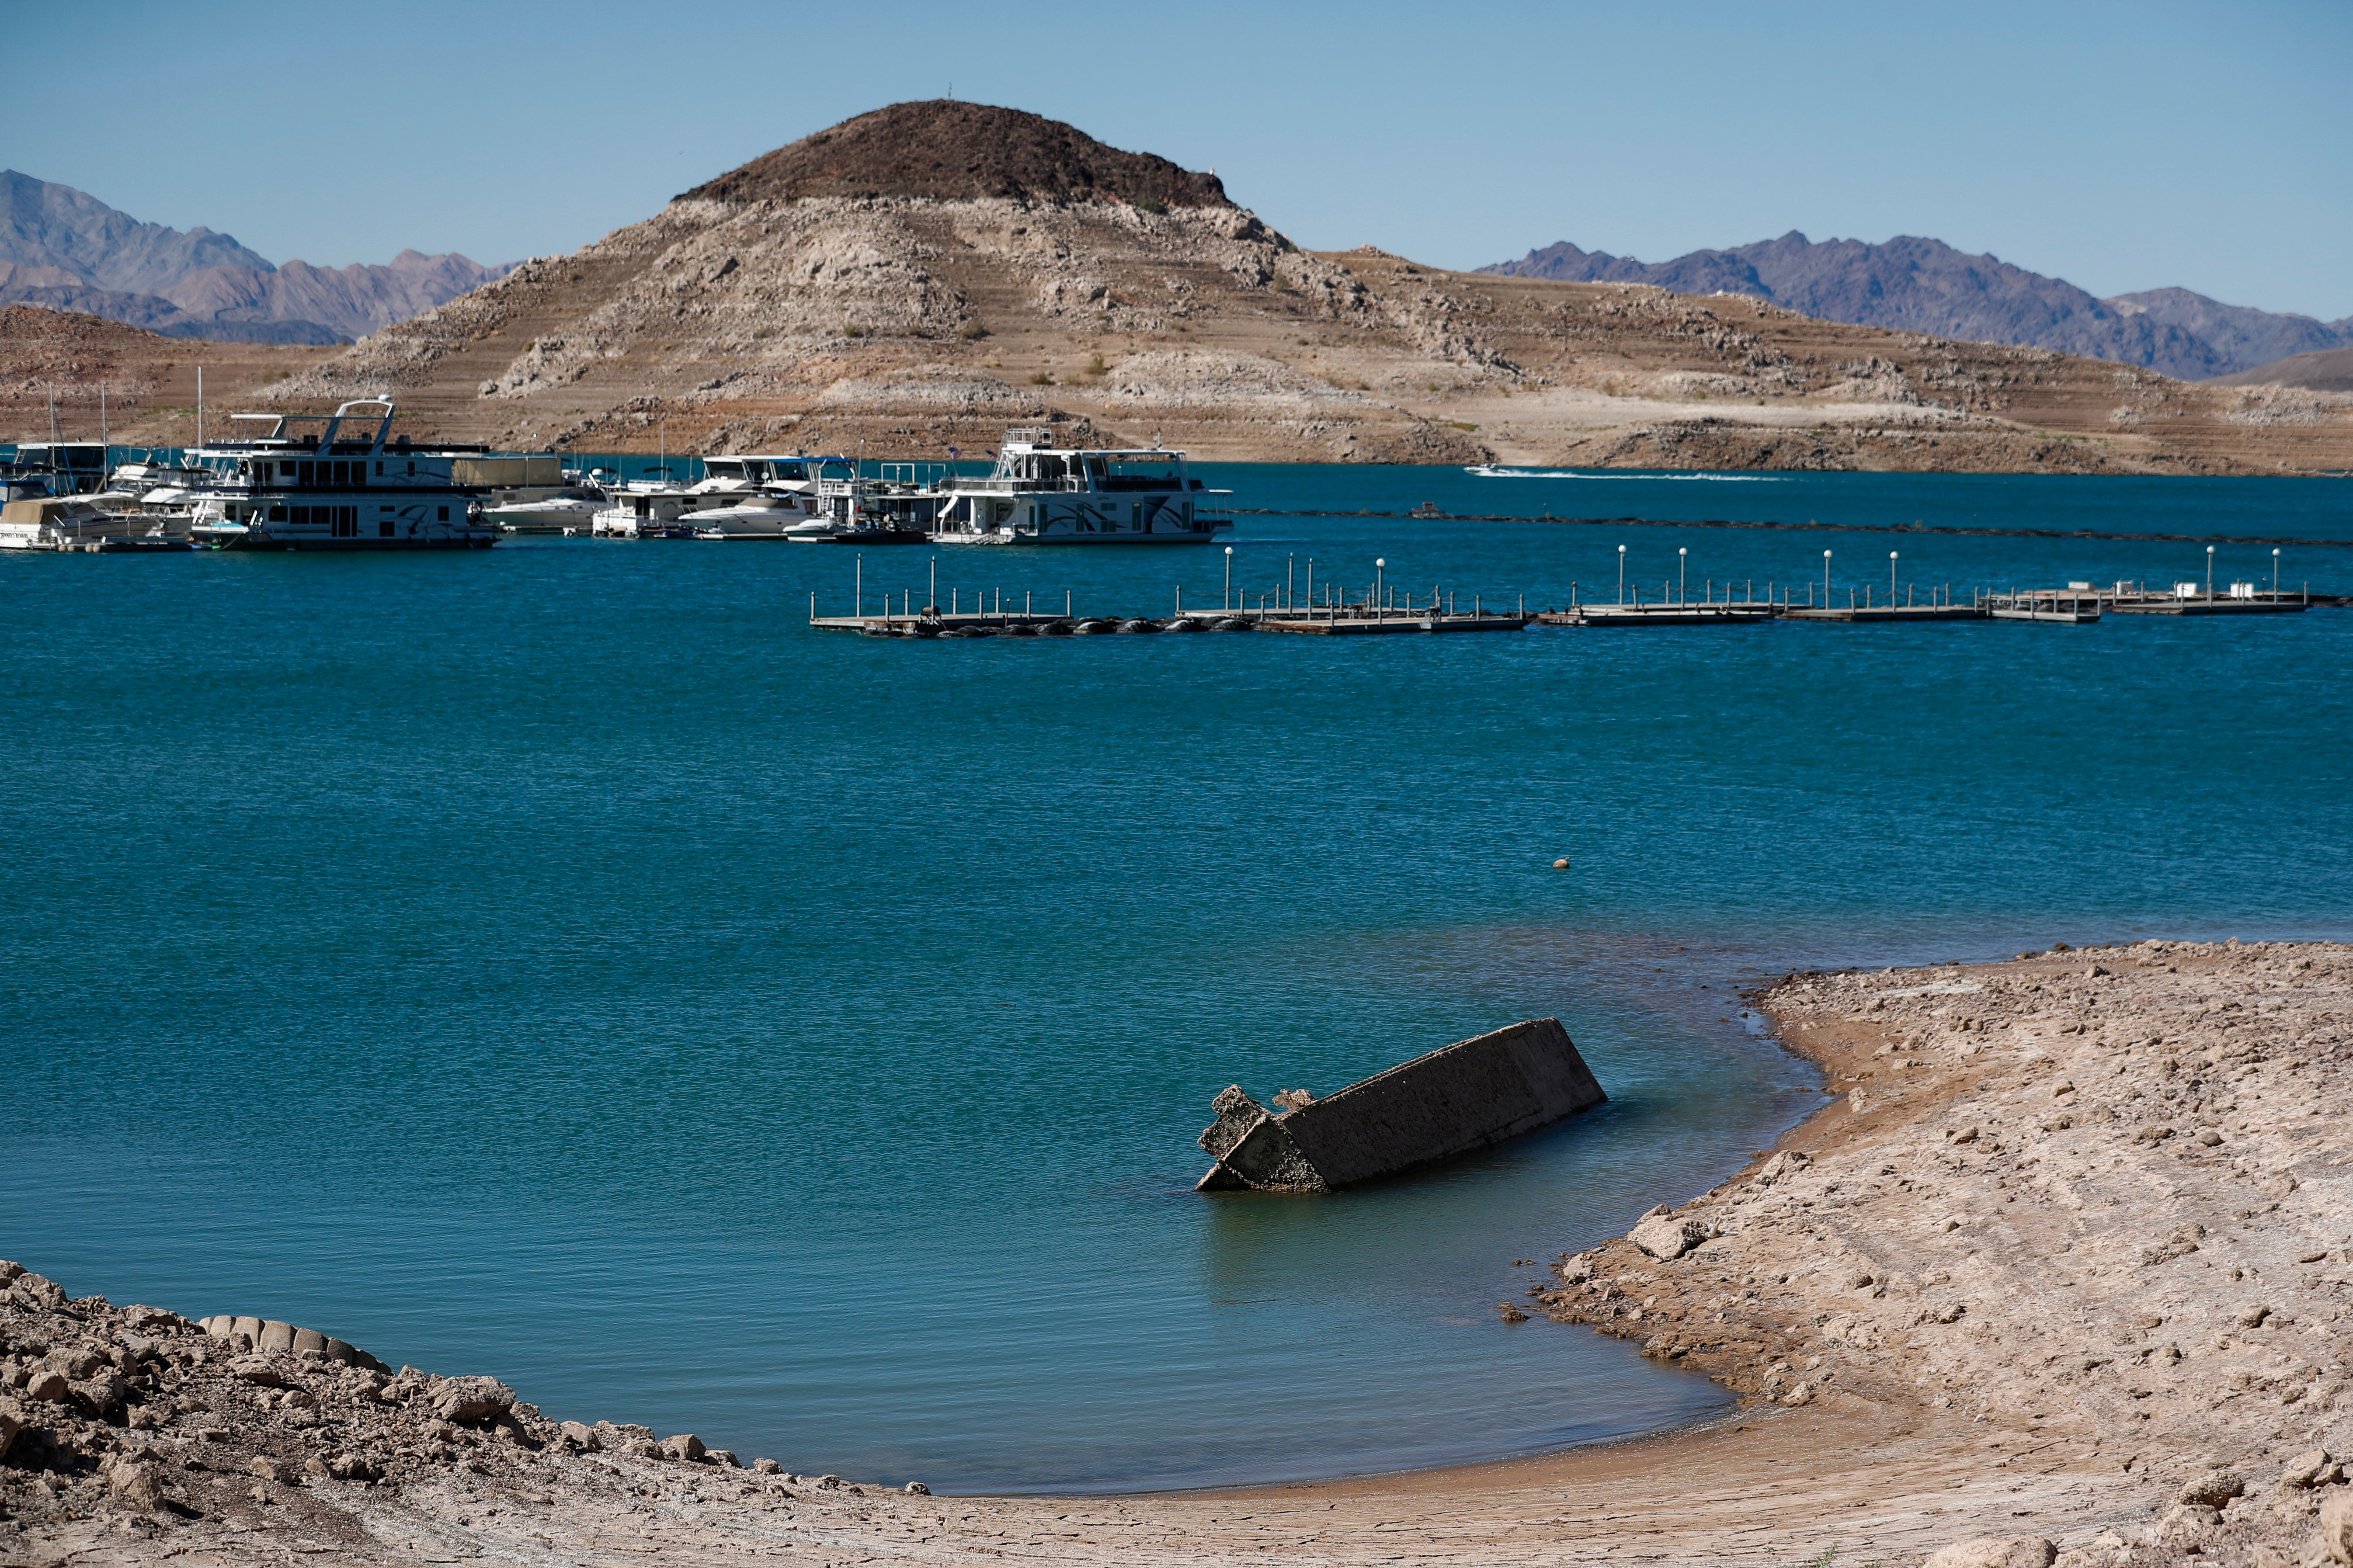 The landing craft, as seen from the receding shoreline of Lake Mead